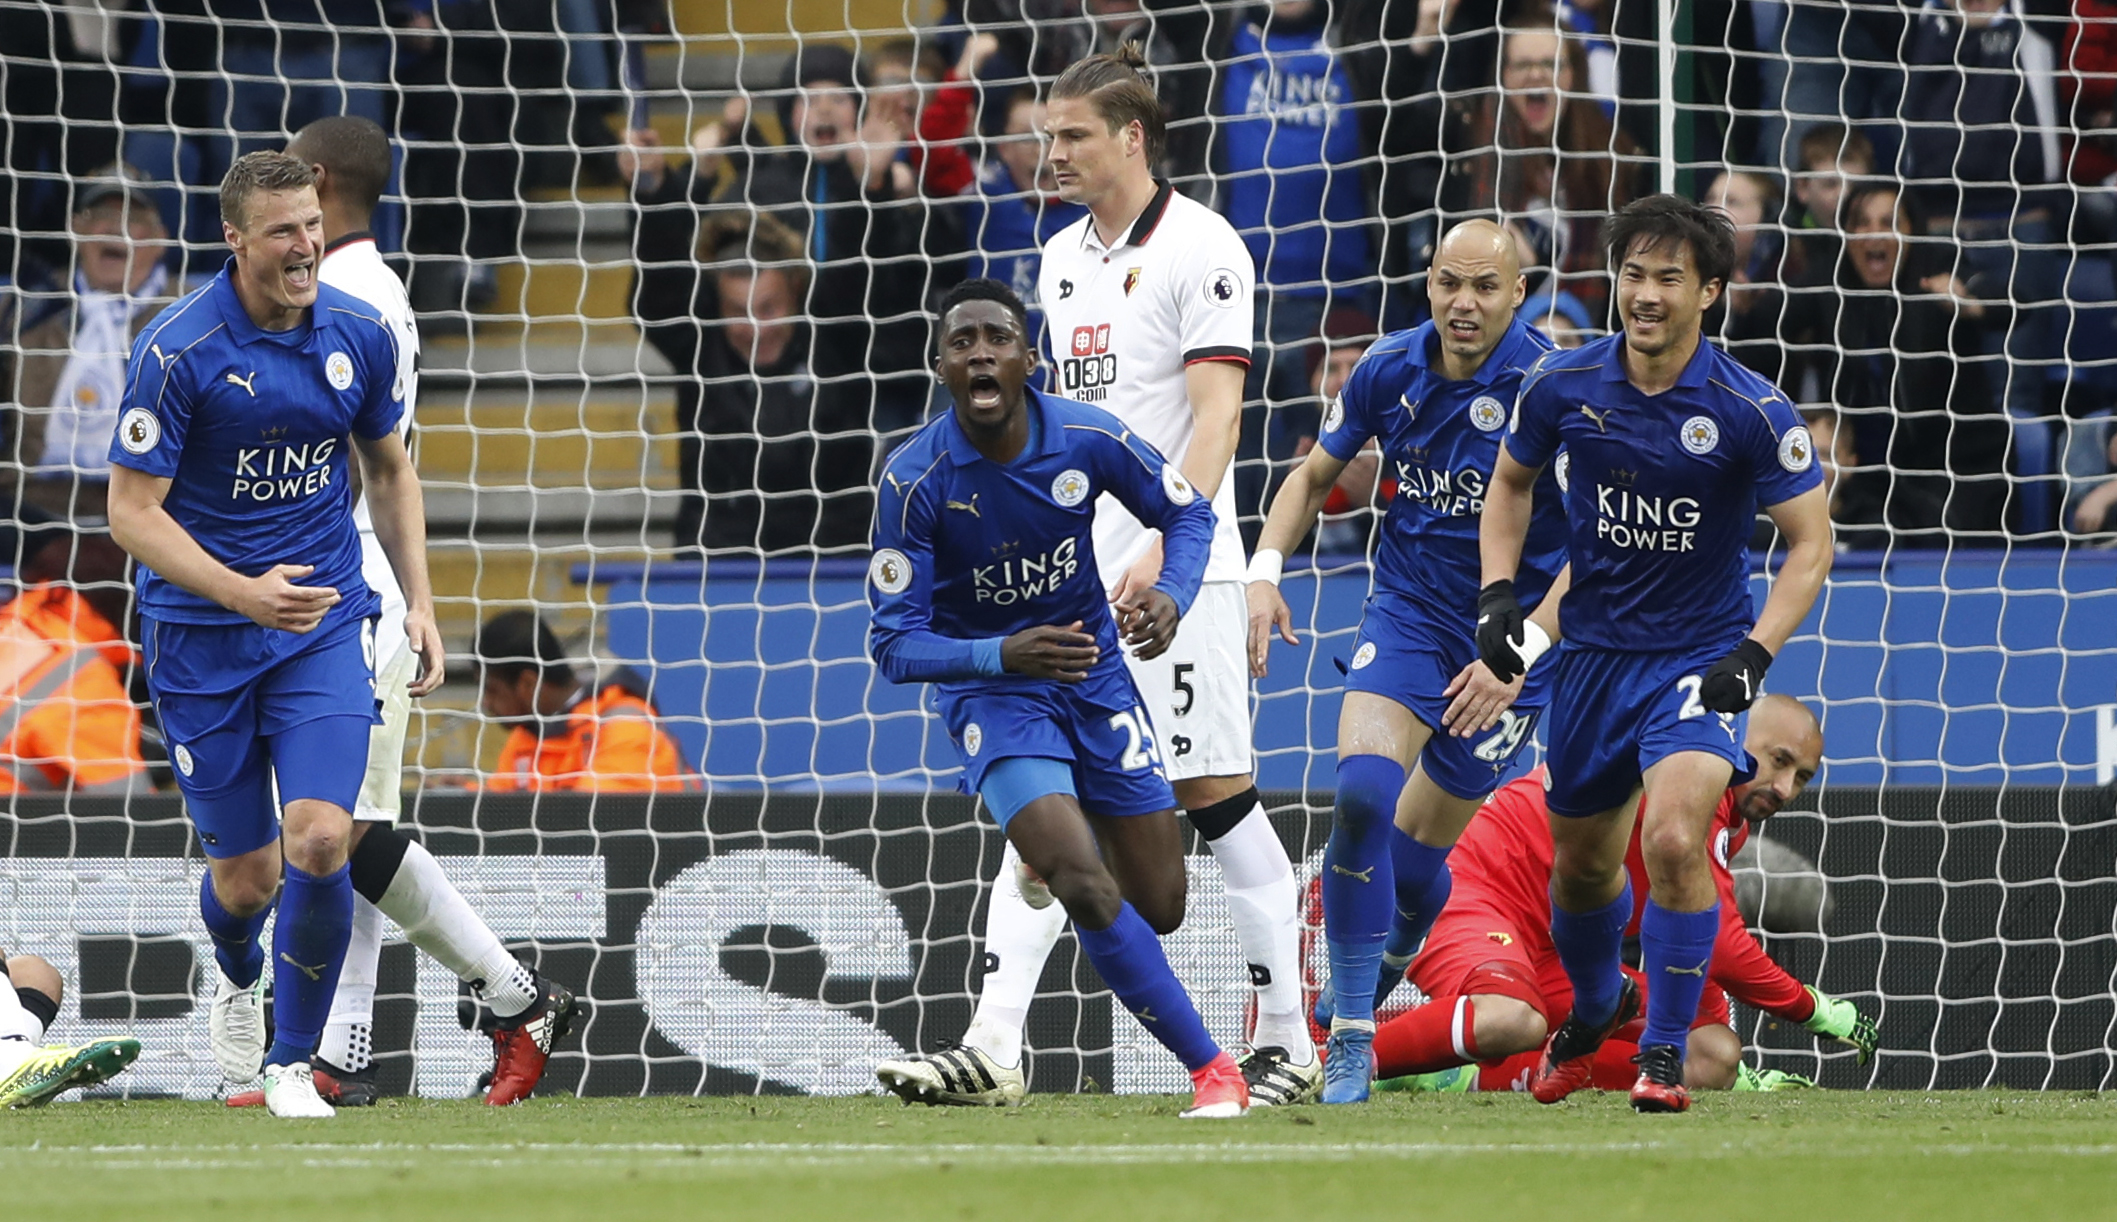 Football: Leicester ease past Watford to climb into top half